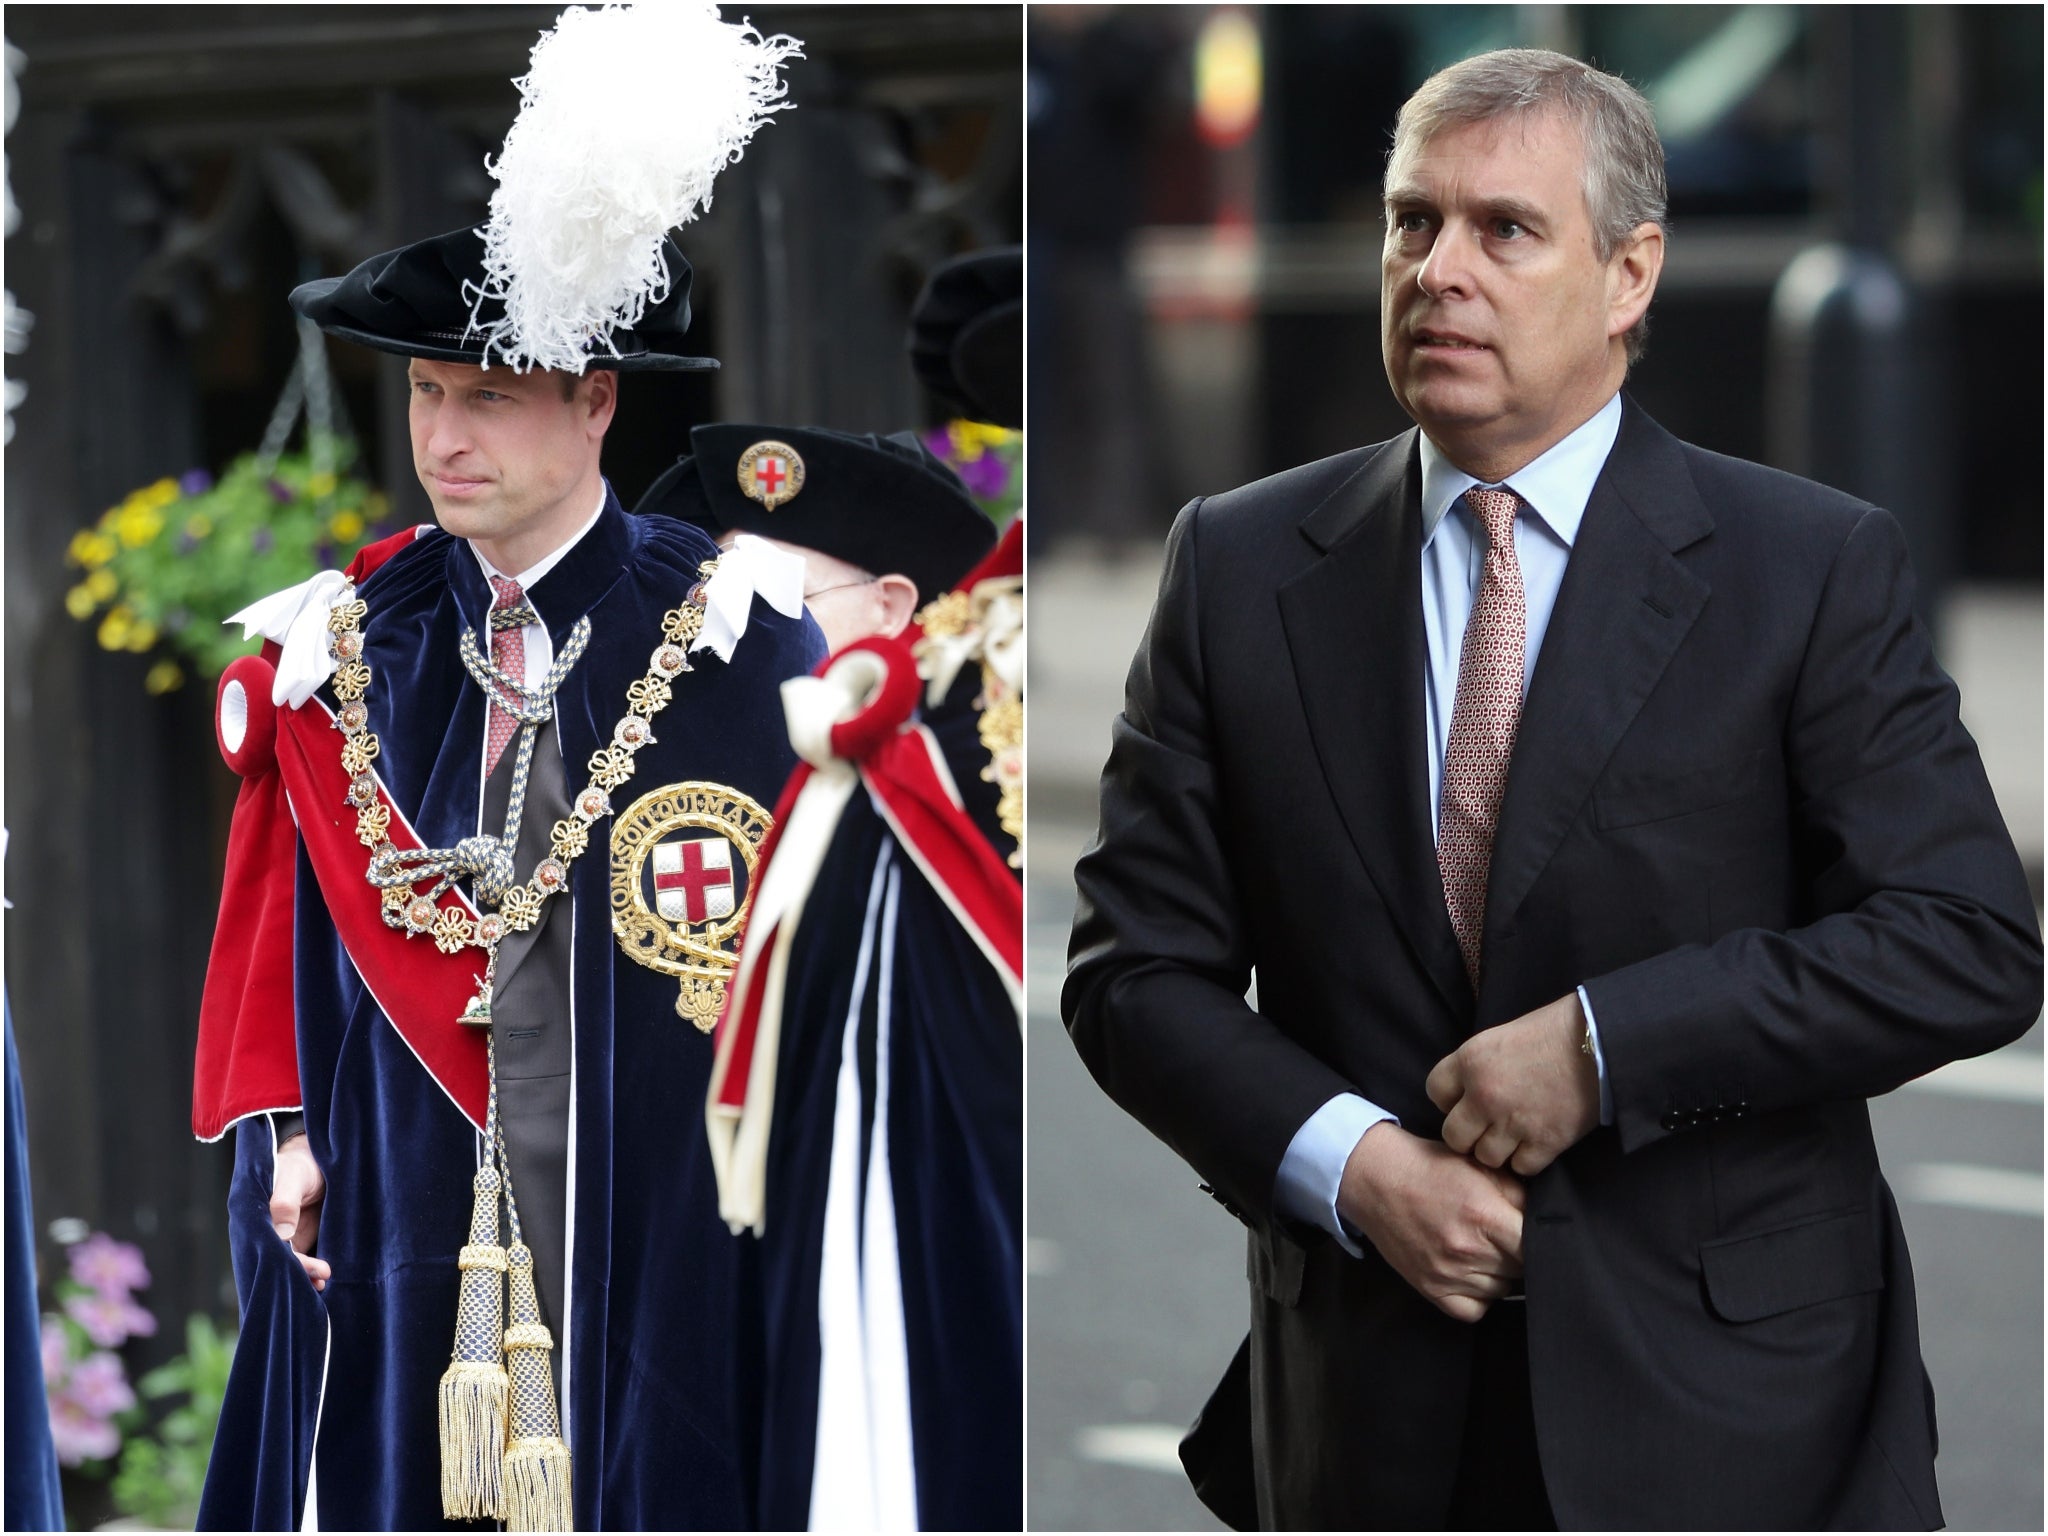 Prince William (left) and Prince Andrew